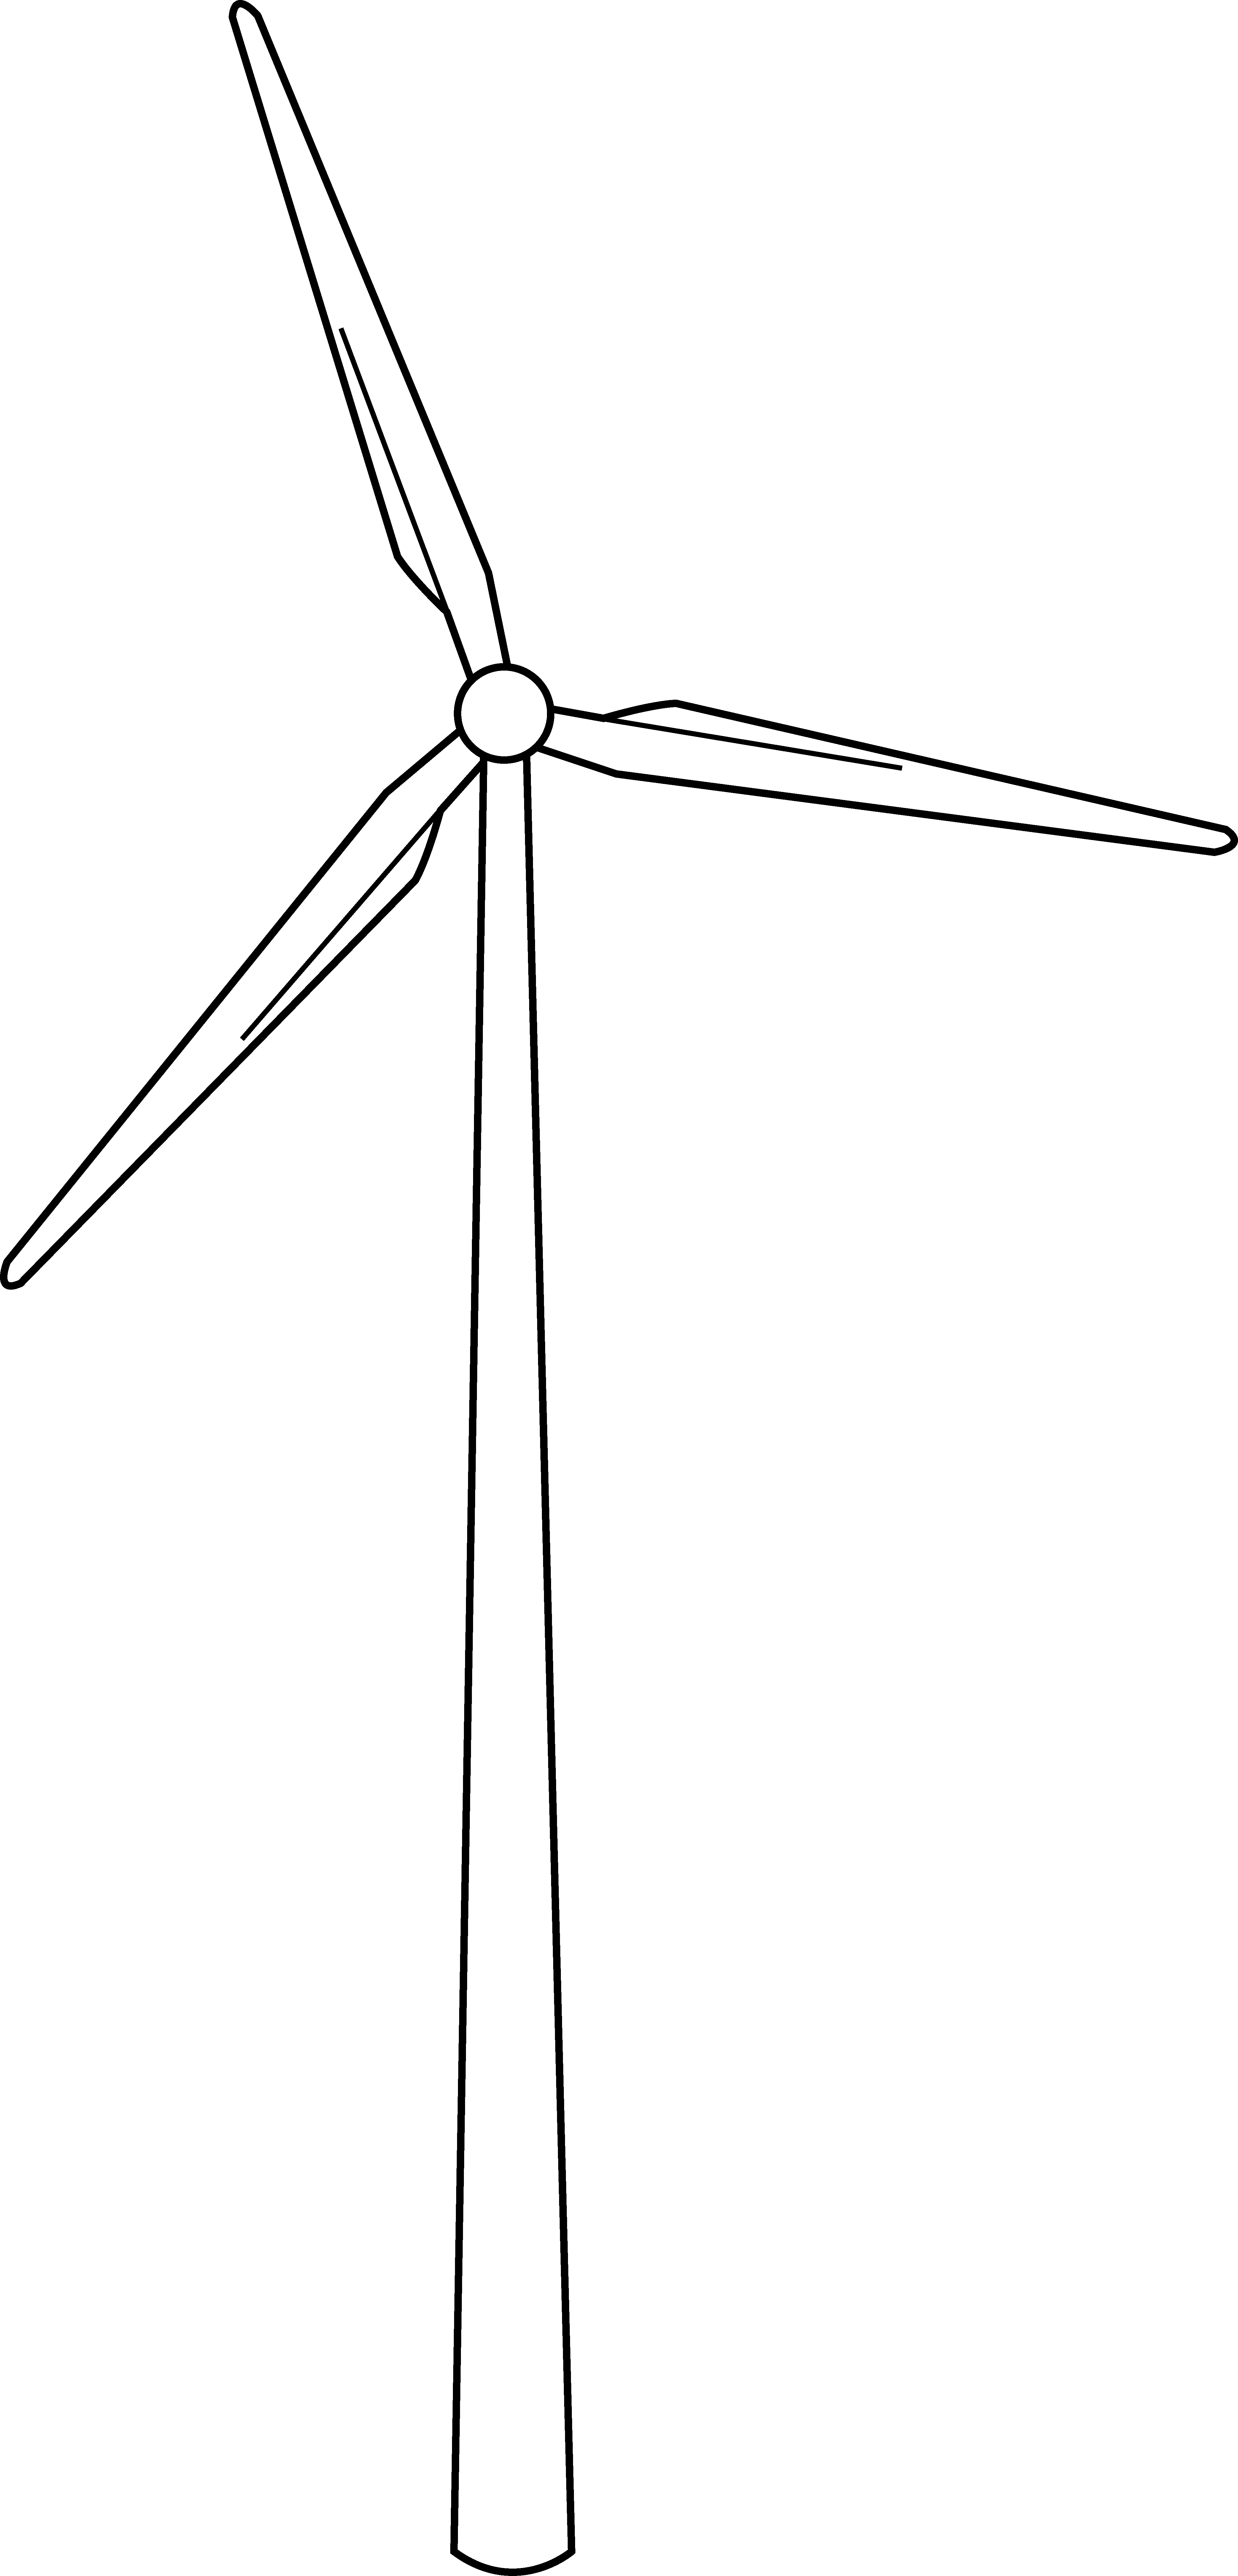 Wind Turbine clipart #10, Download drawings